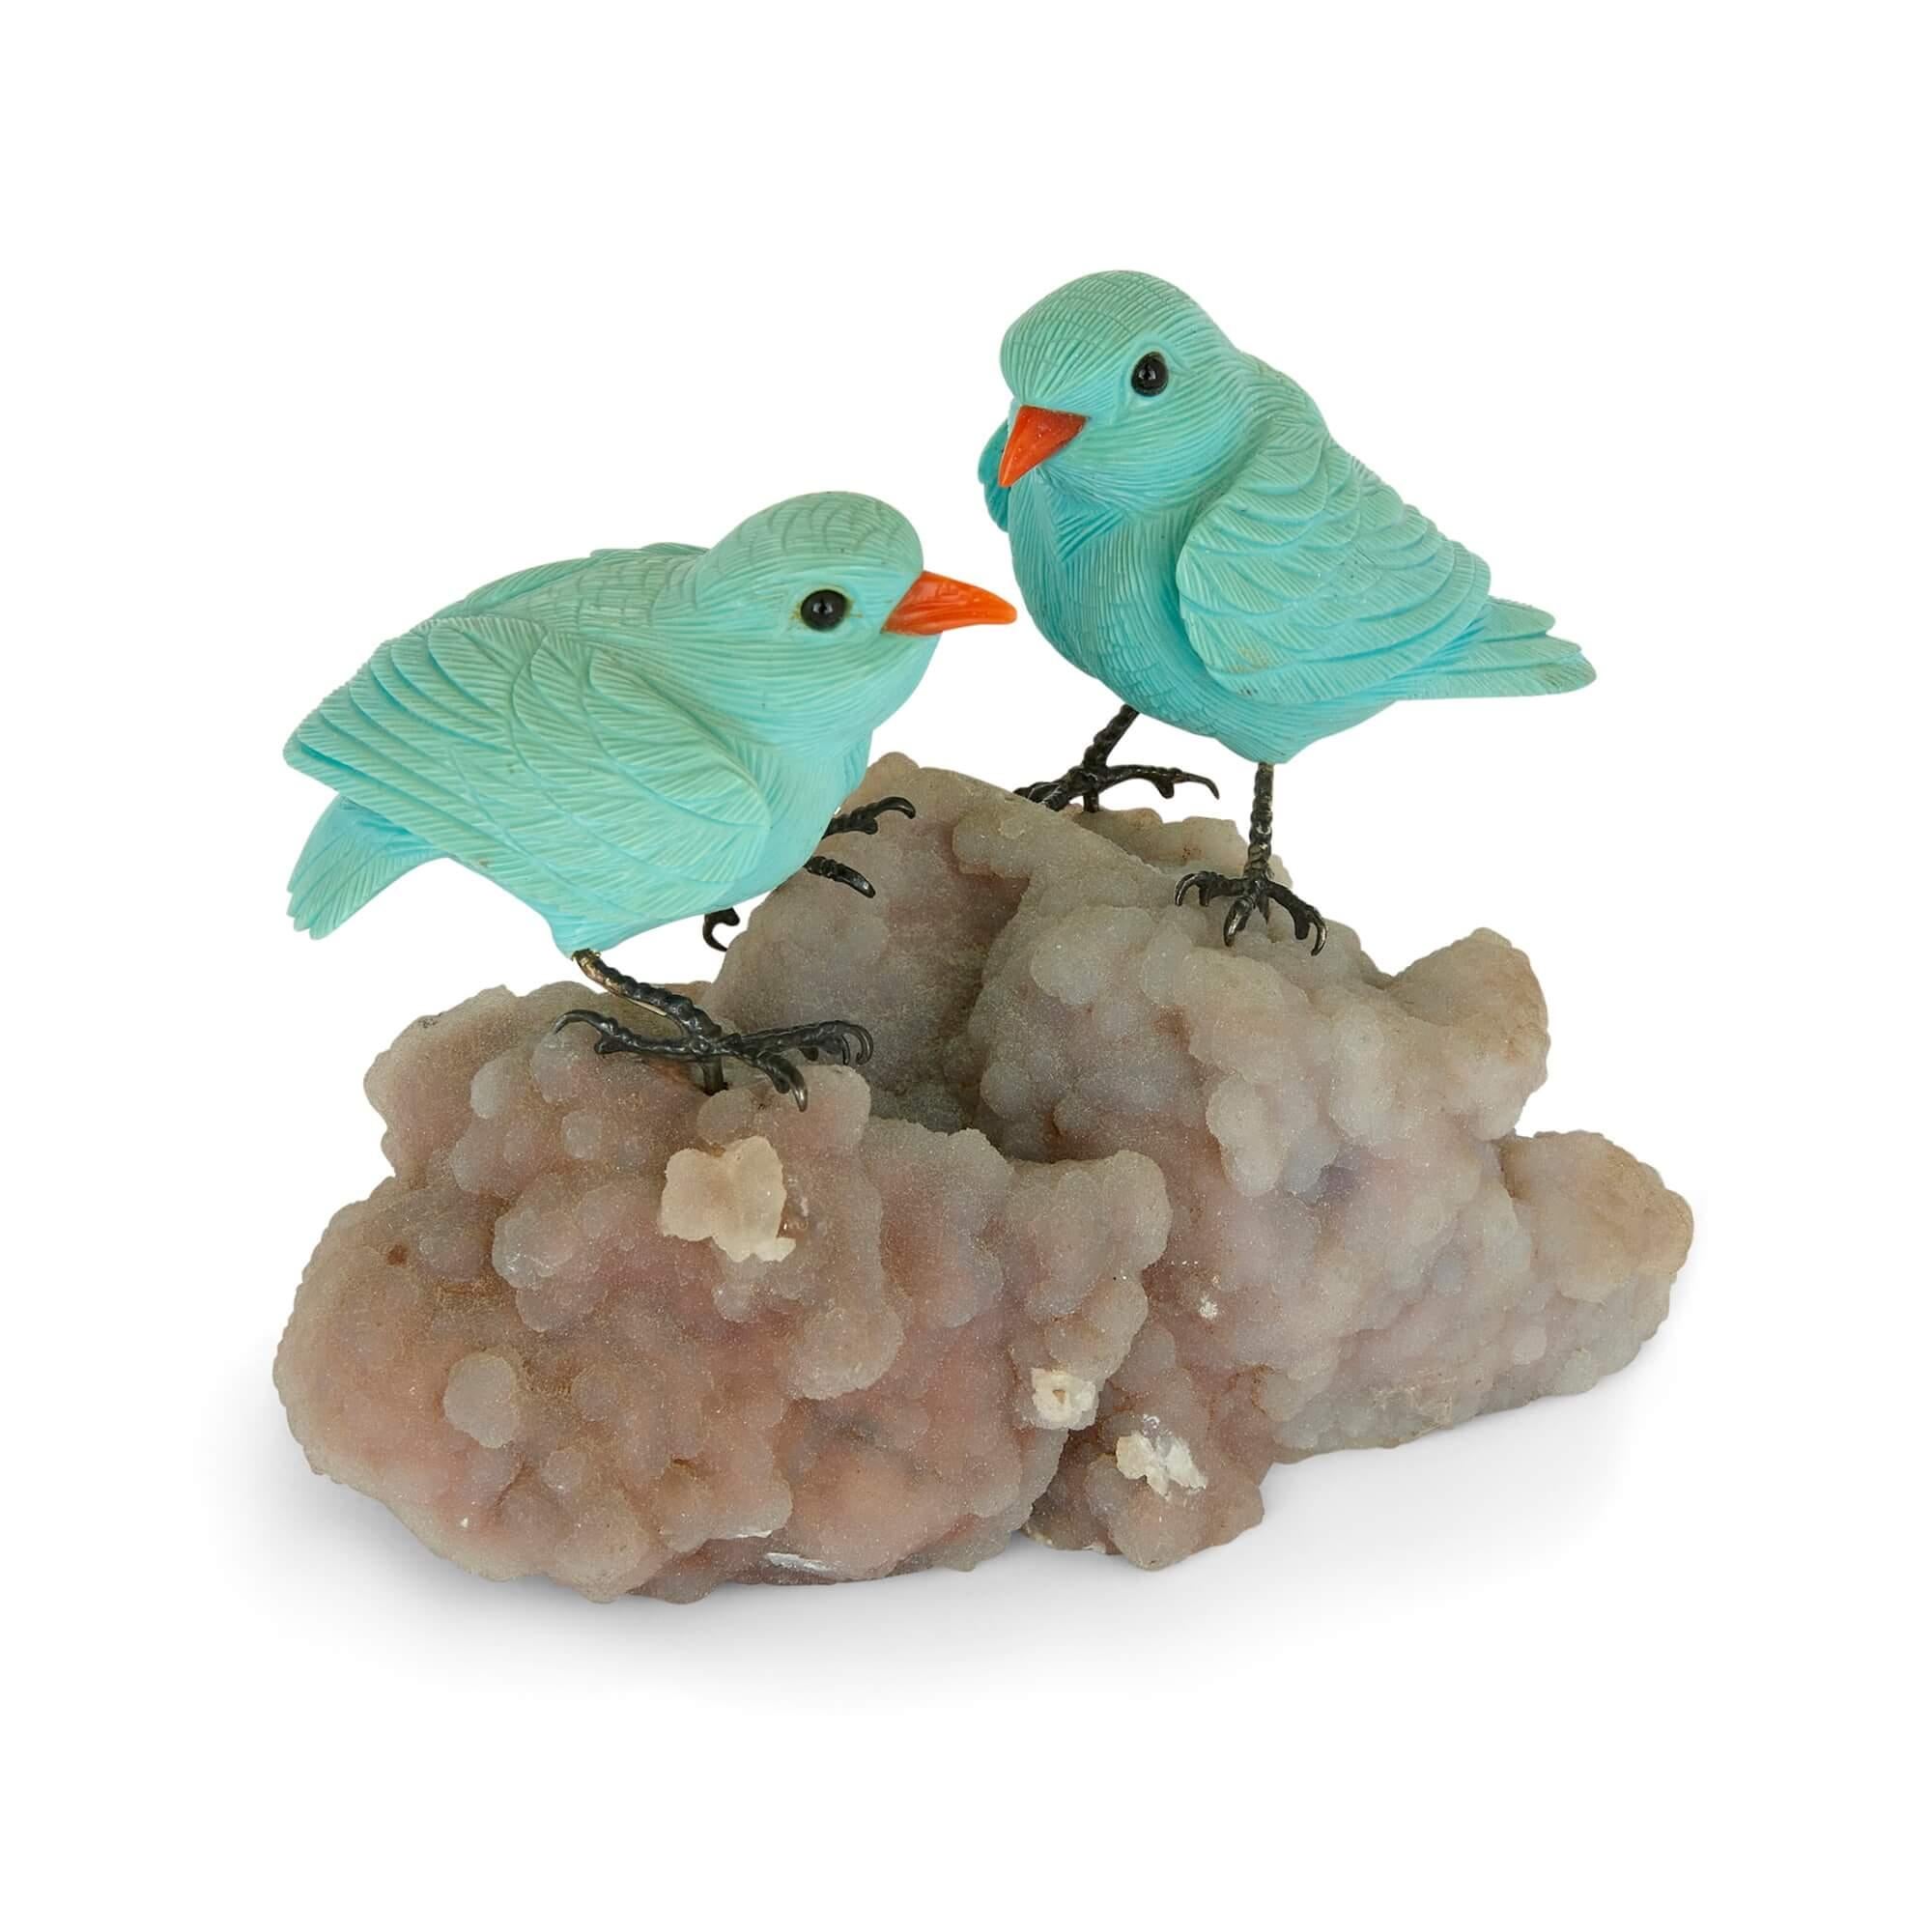 Semi-precious stone and silver bird model 
Continental, 20th Century 
Height 9cm, width 11cm, depth 6cm

A charming pair of sparrows perches atop a youngite agate rock. The birds are crafted from a selection of semi-precious stones. Turquoise is